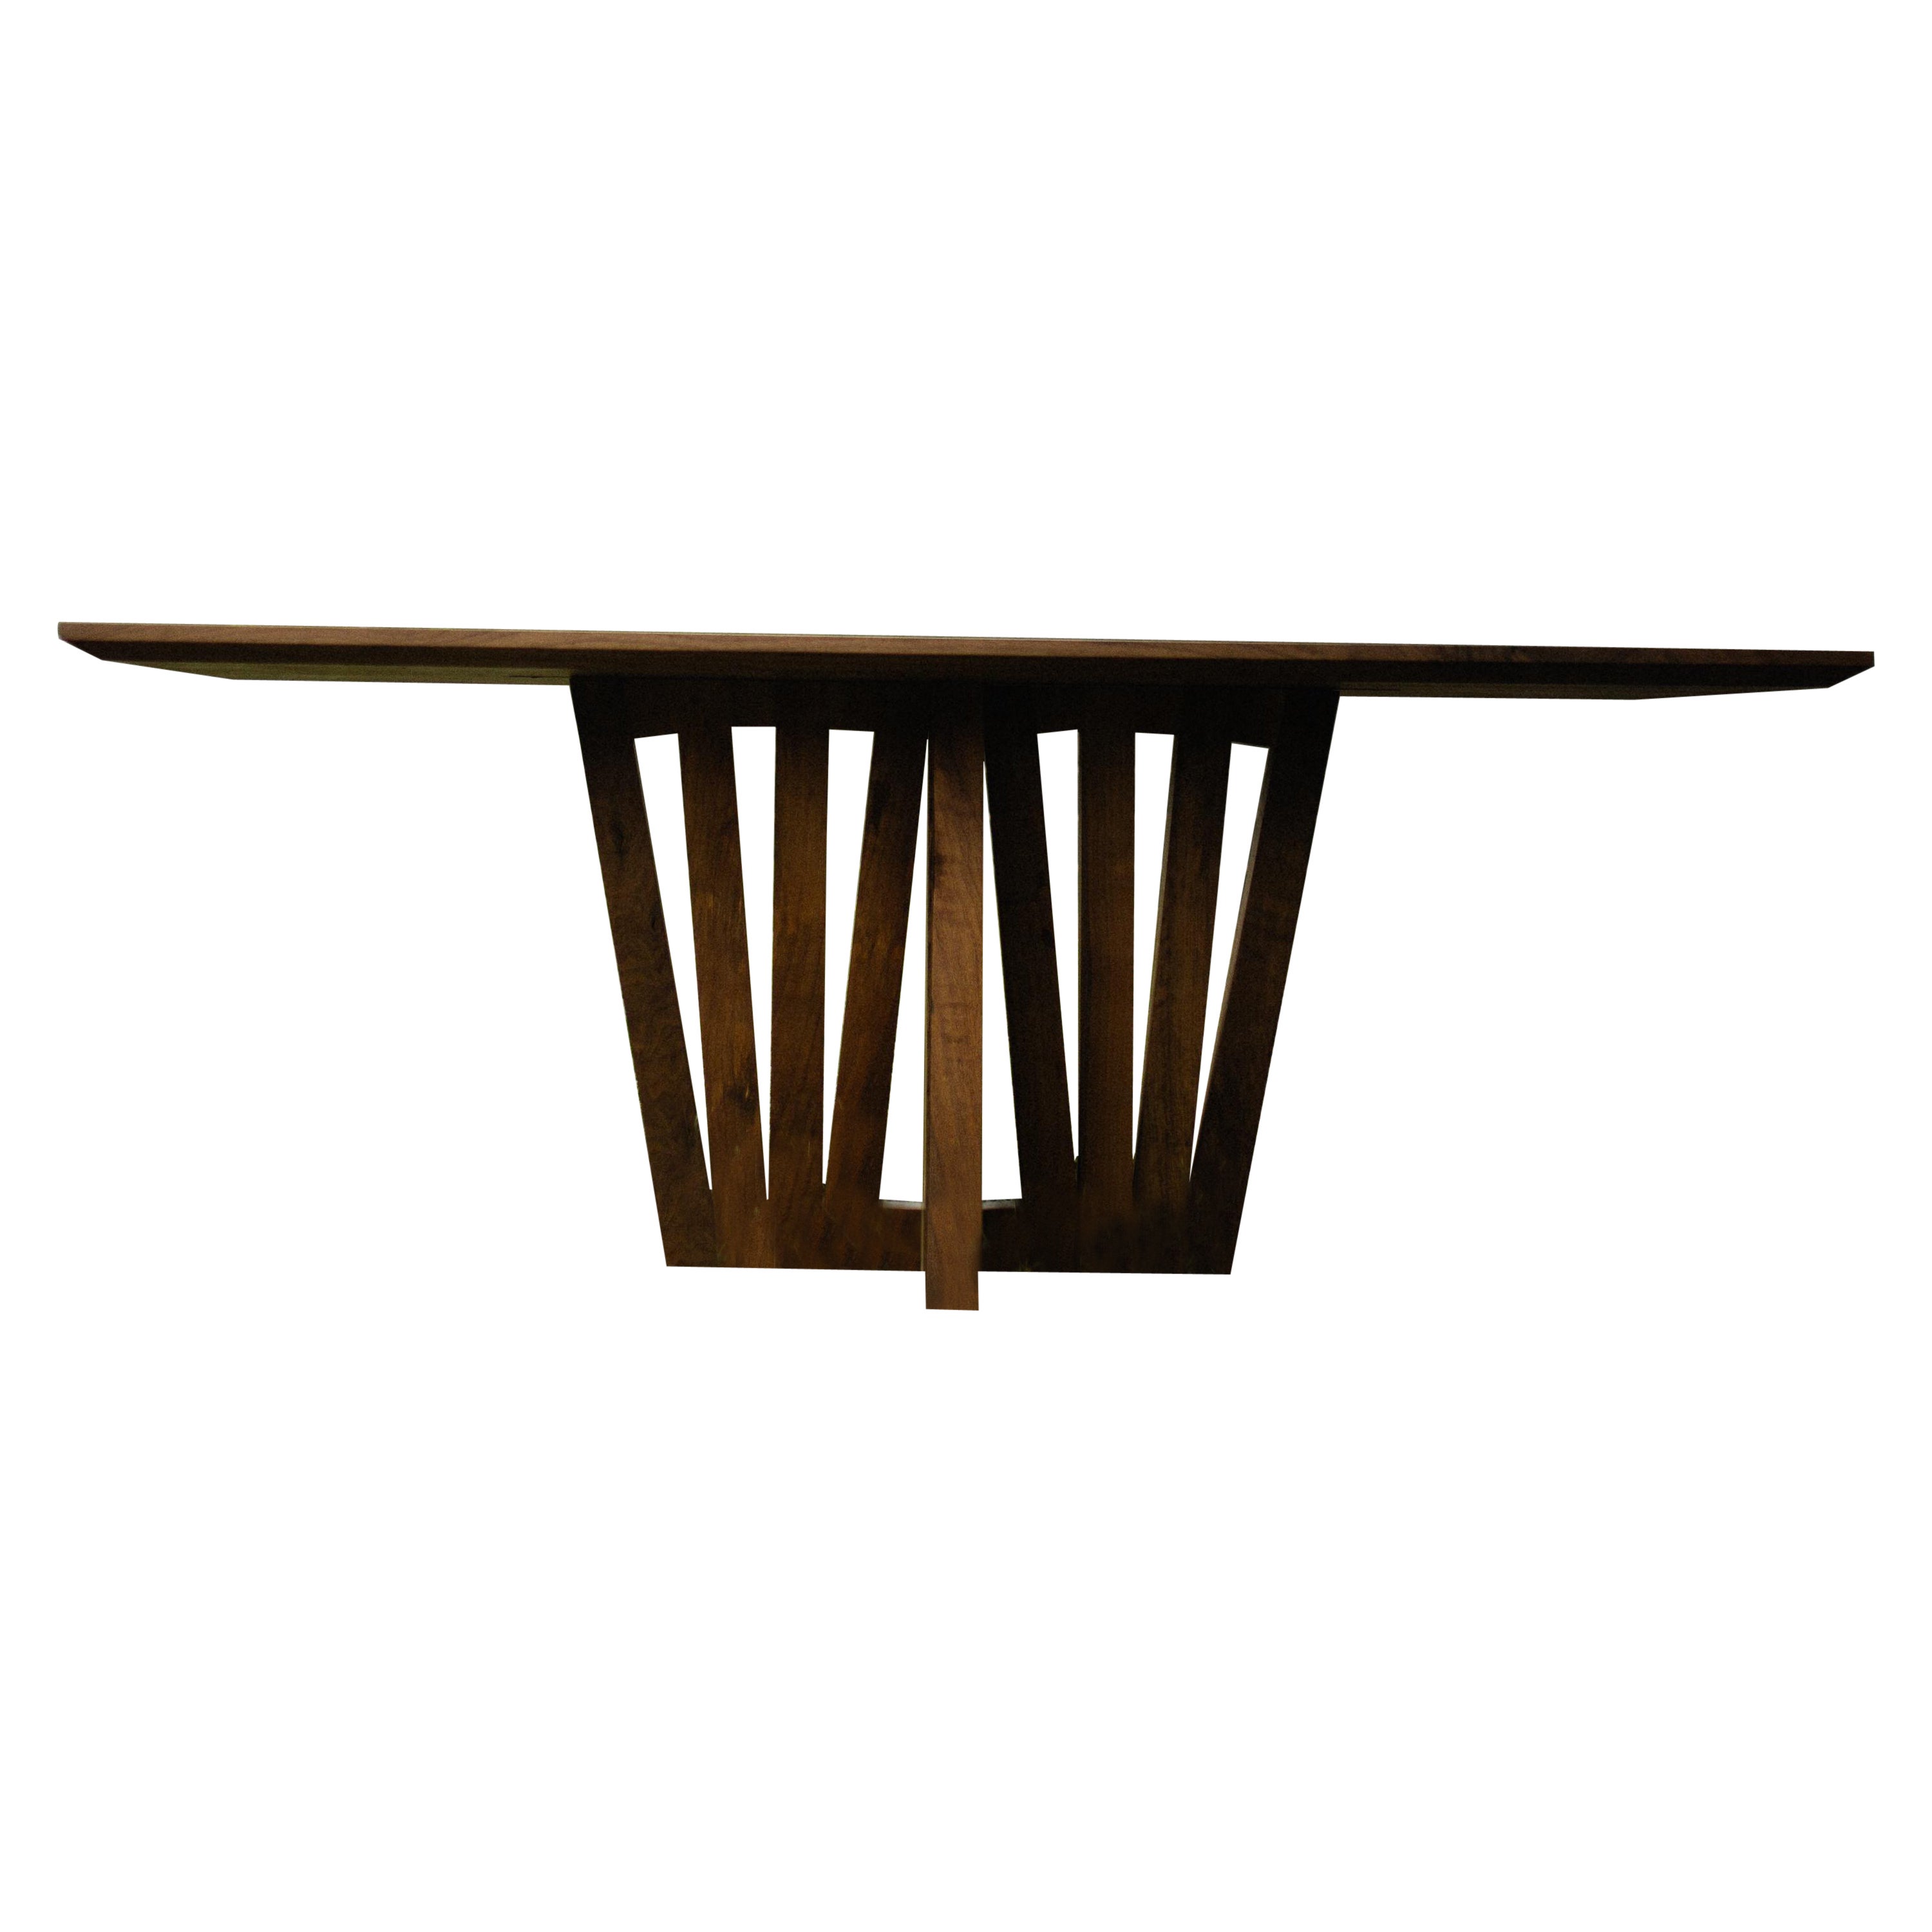 Imani Dining table